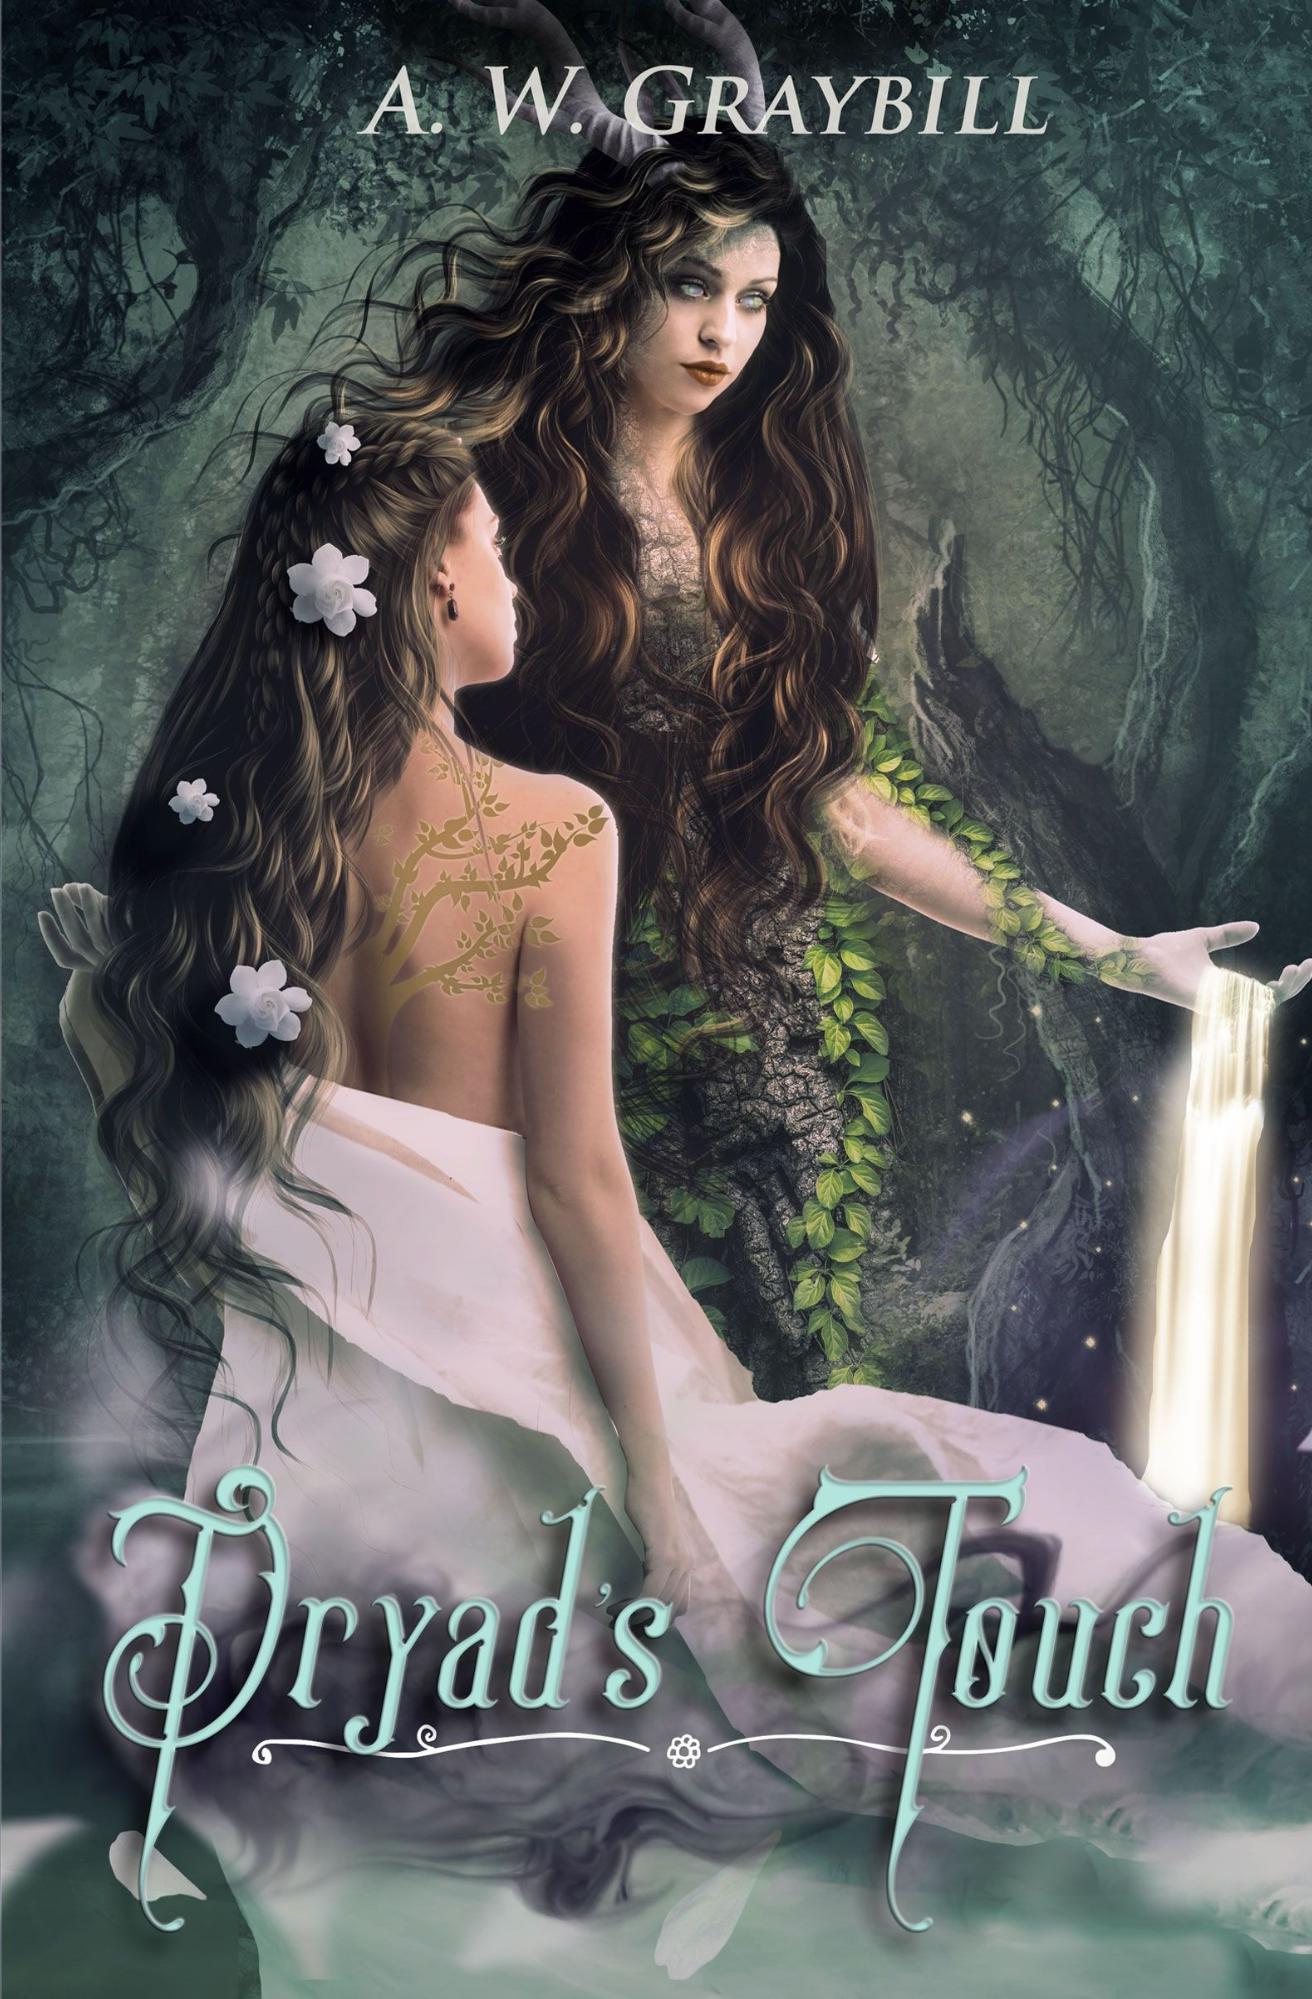 FREE: Dryad’s Touch by A. W. Graybill